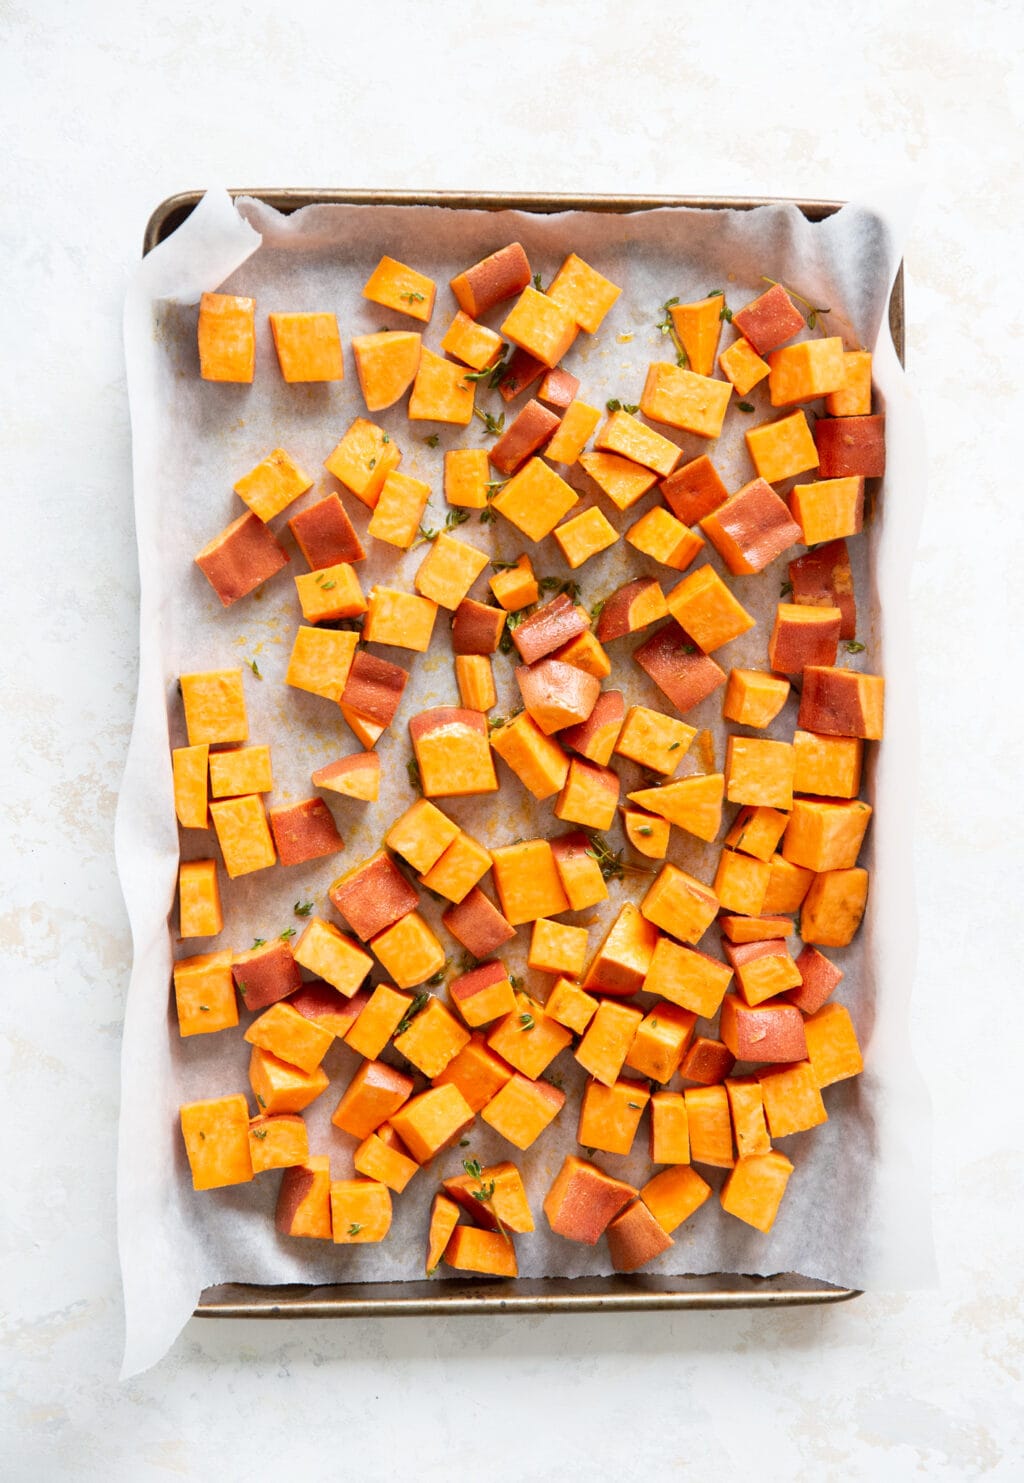 Cubed sweet potatoes are on a baking sheet that is lined with parchment paper.